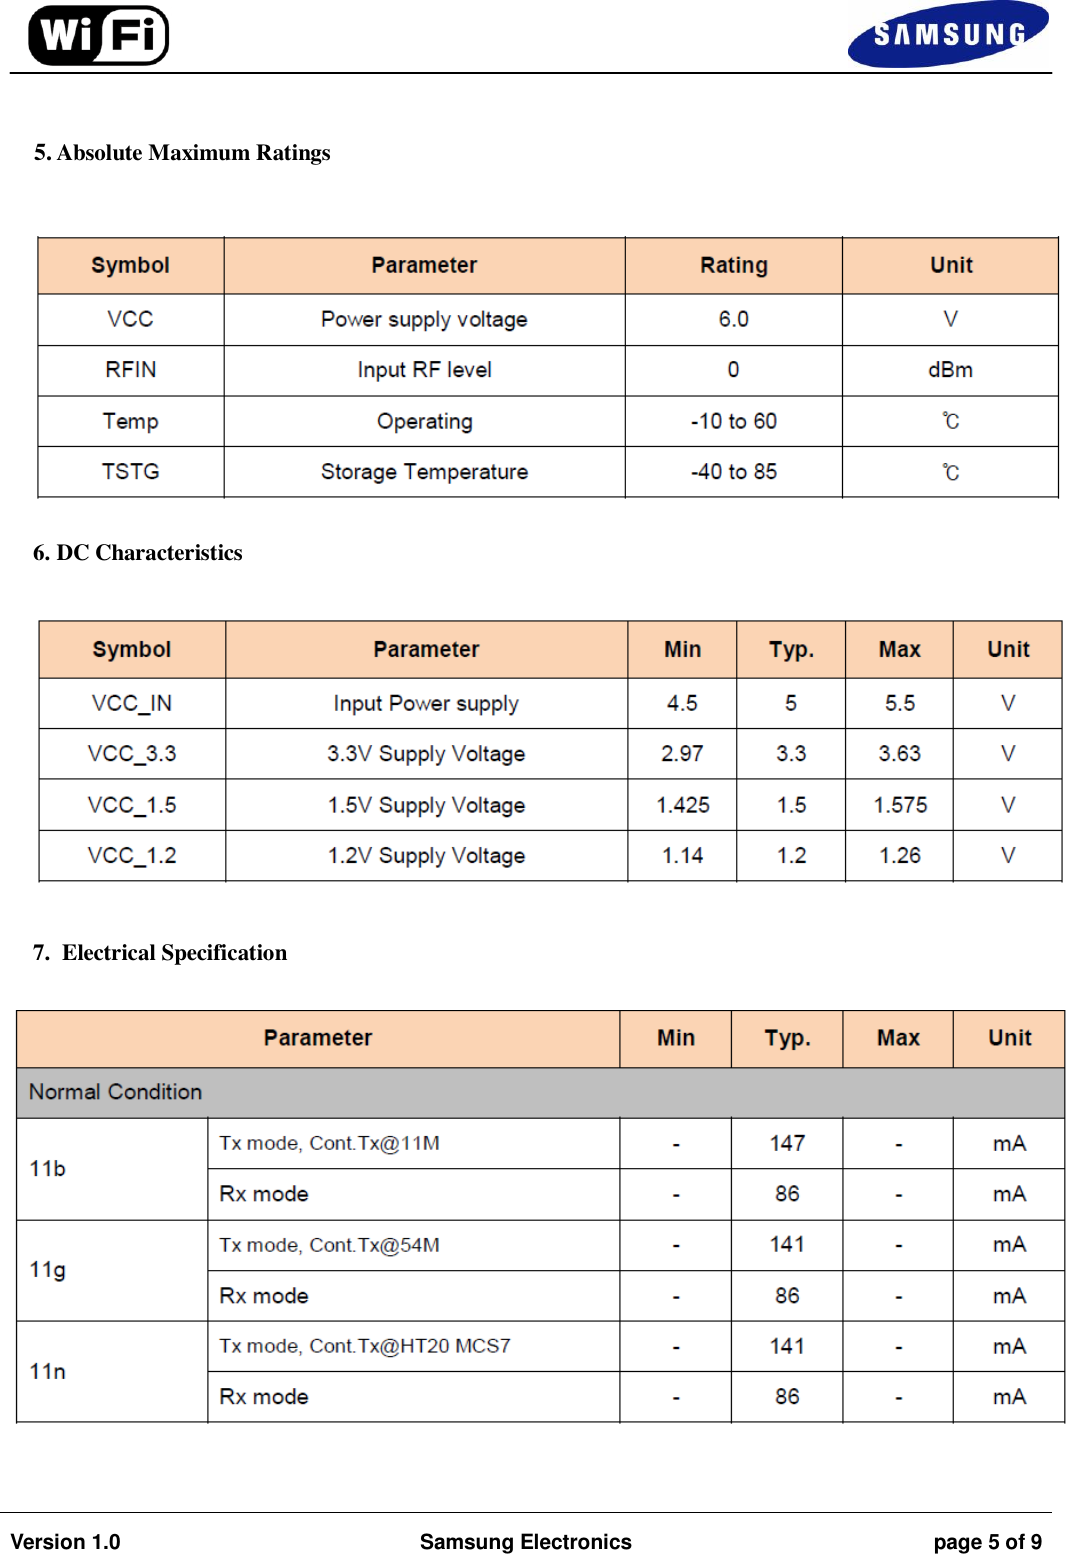                                                                                                                                         Version 1.0 Samsung Electronics page 5 of 9      5. Absolute Maximum Ratings     6. DC Characteristics    7.  Electrical Specification     